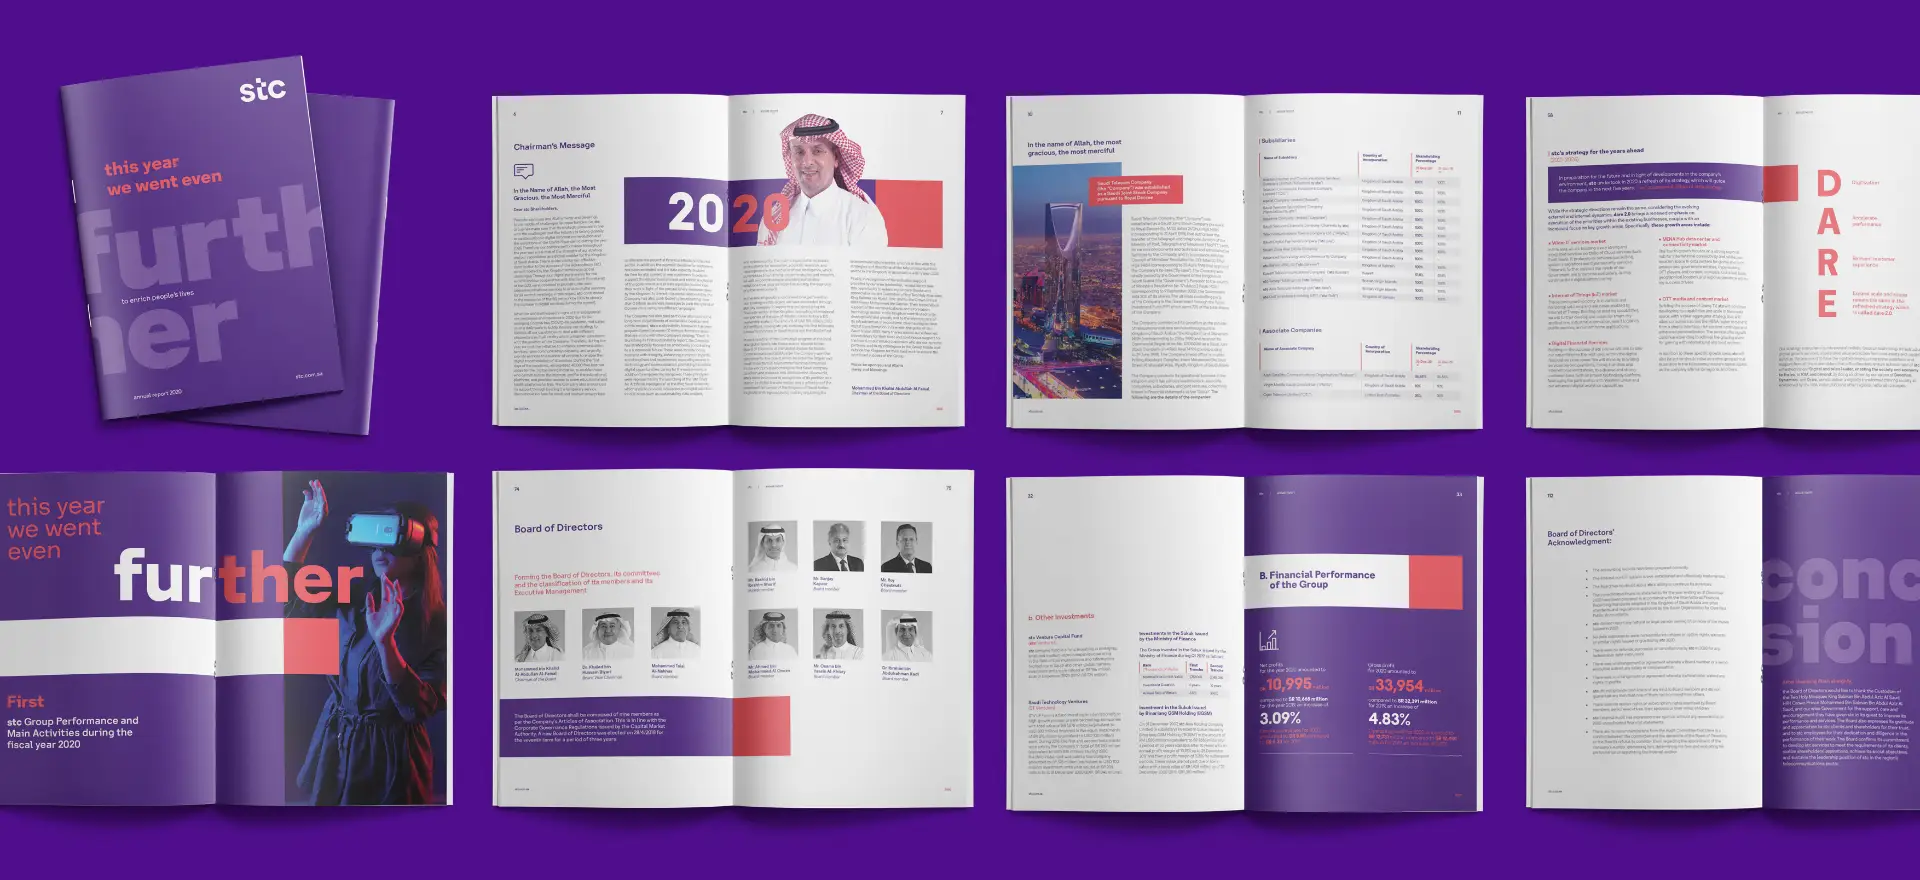 Spark Projects - STC Annual Report 2020